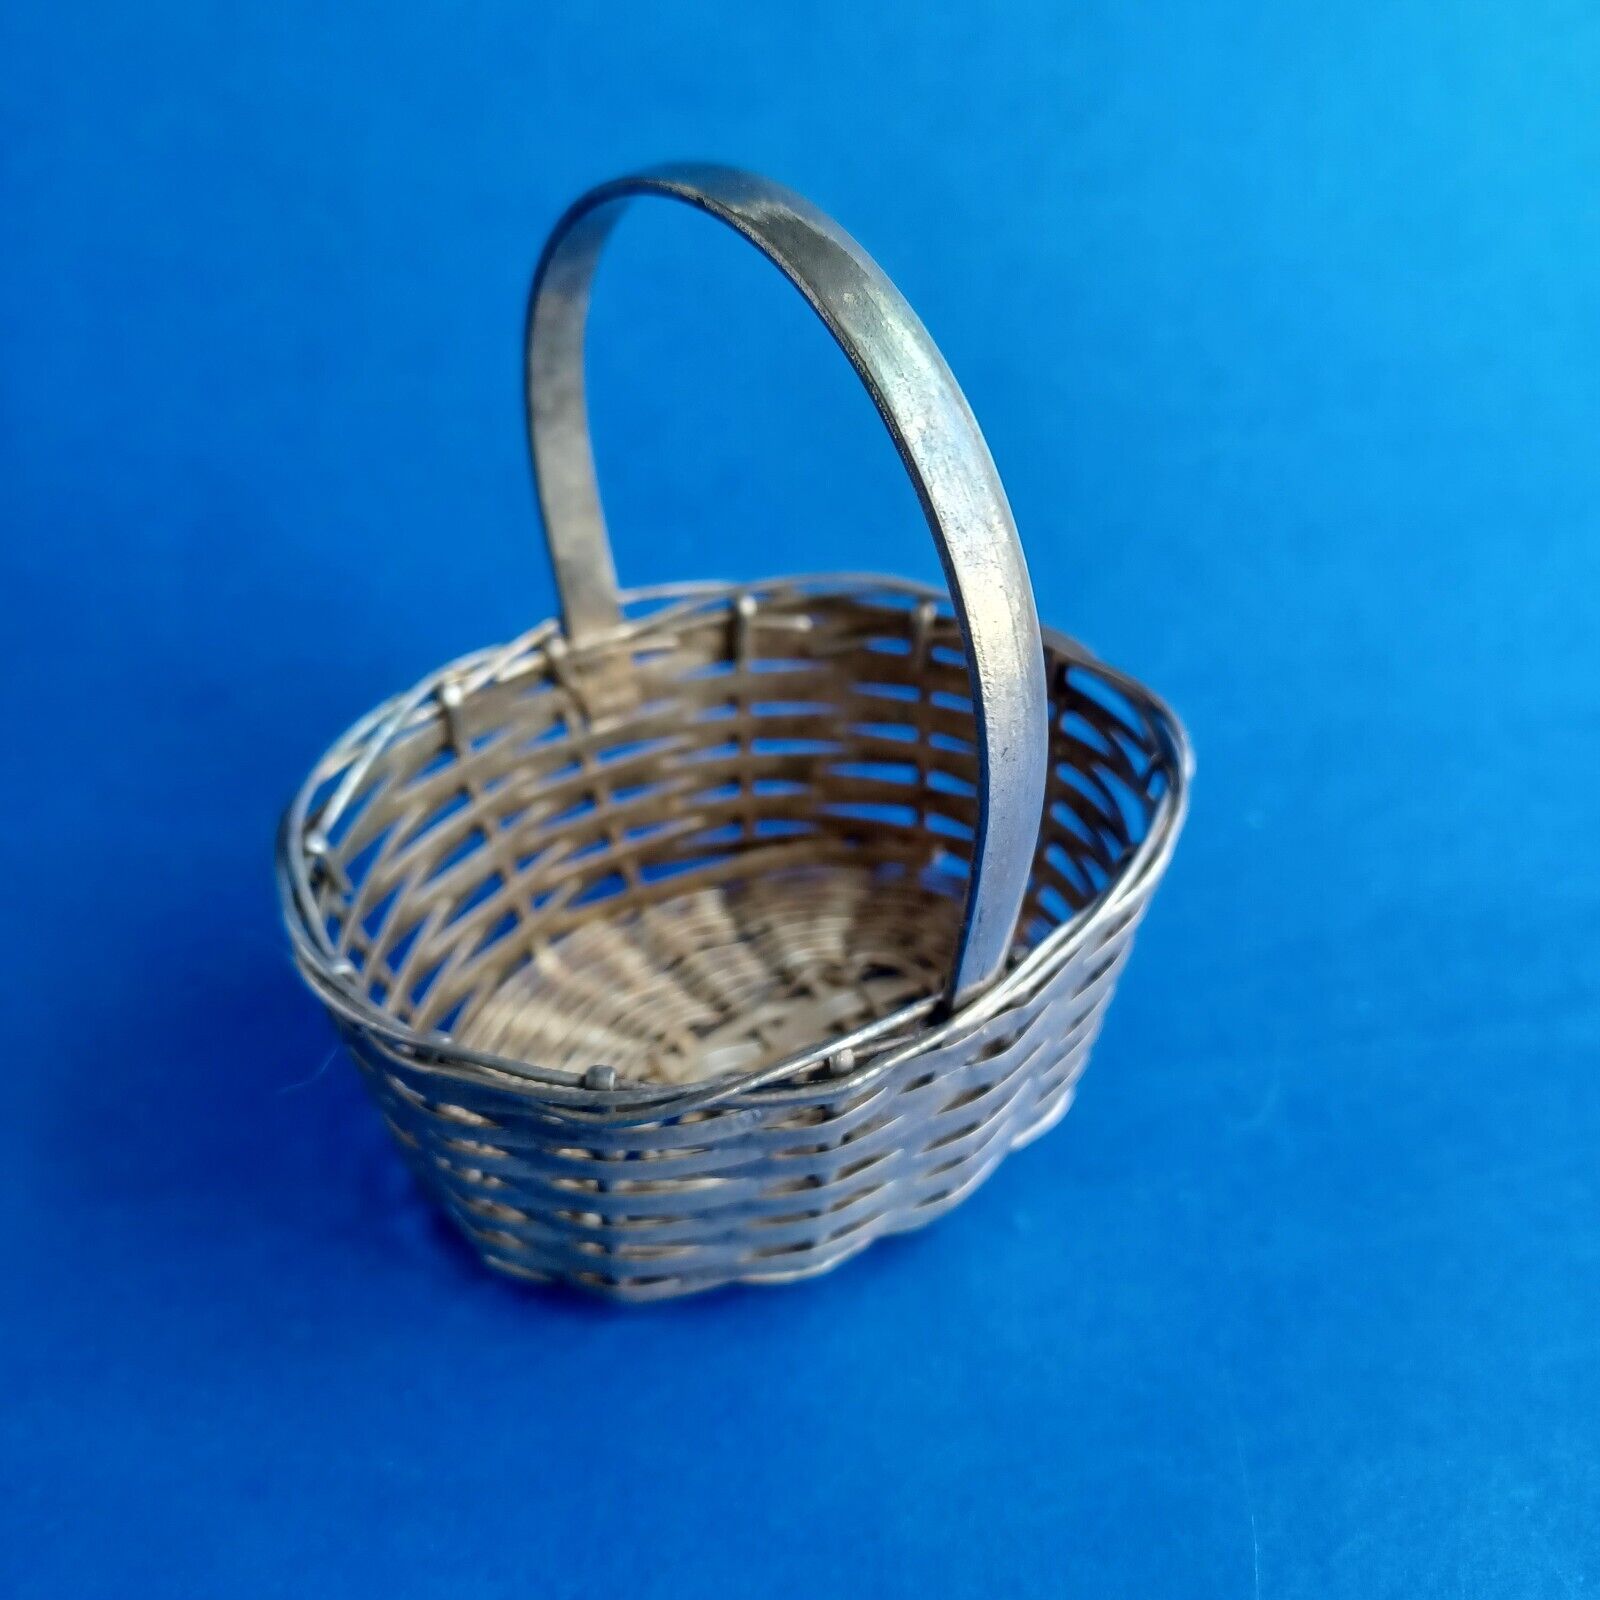 Vintage Small Silver Metal Wire Woven Basket With Handle Rustic Patina Solid